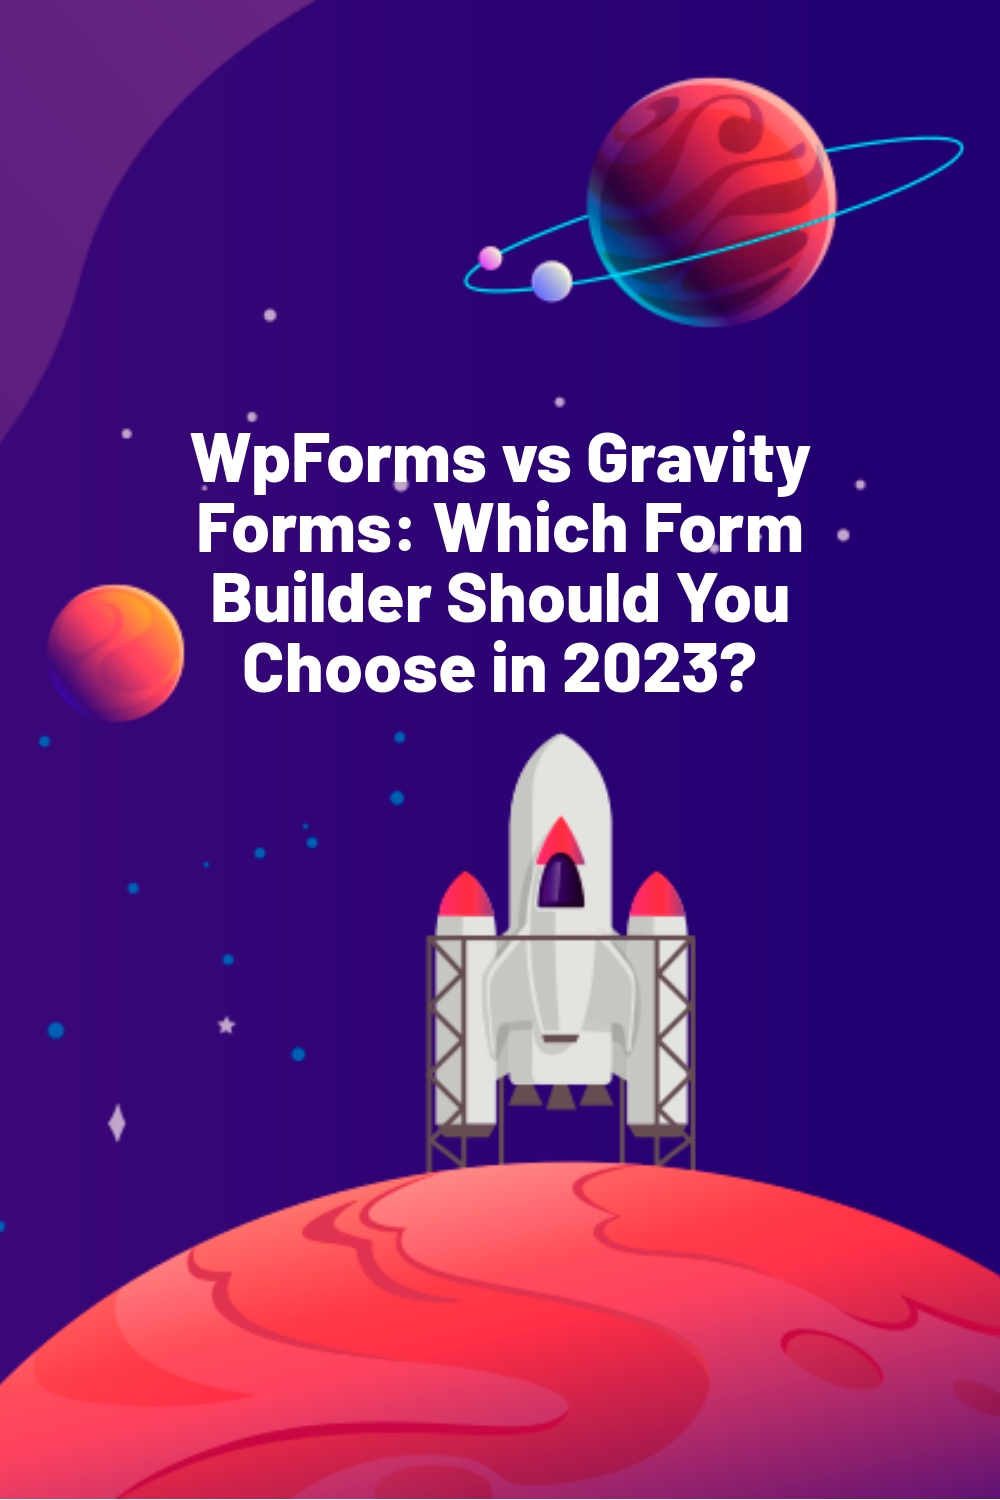 WpForms vs Gravity Forms: Which Form Builder Should You Choose in 2023?